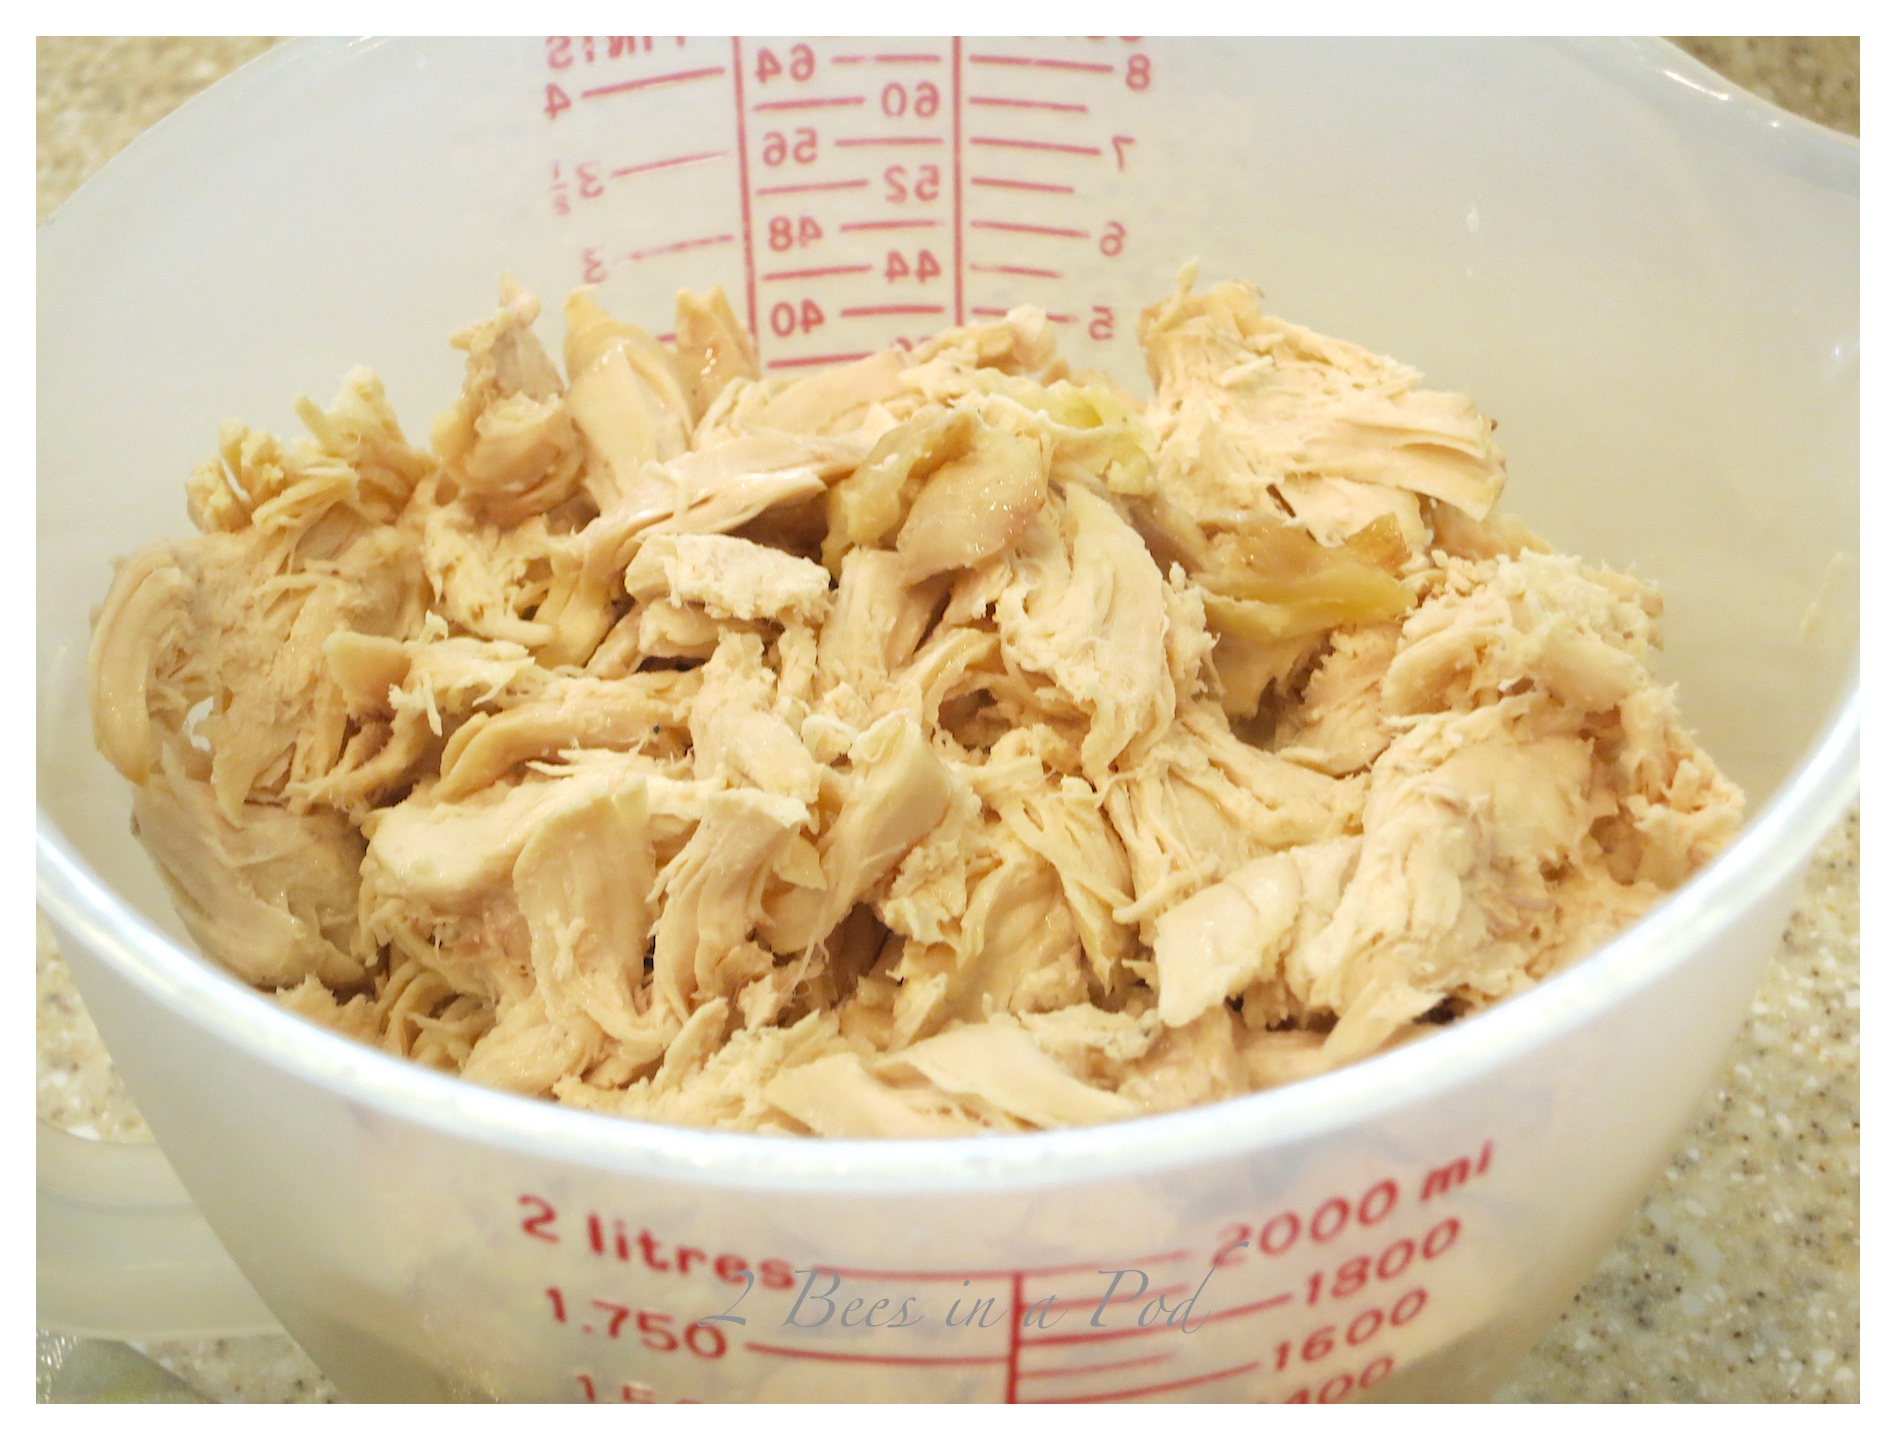 Scrumptious Baked Chicken Salad. Great crunch with added chips, celery and almonds.